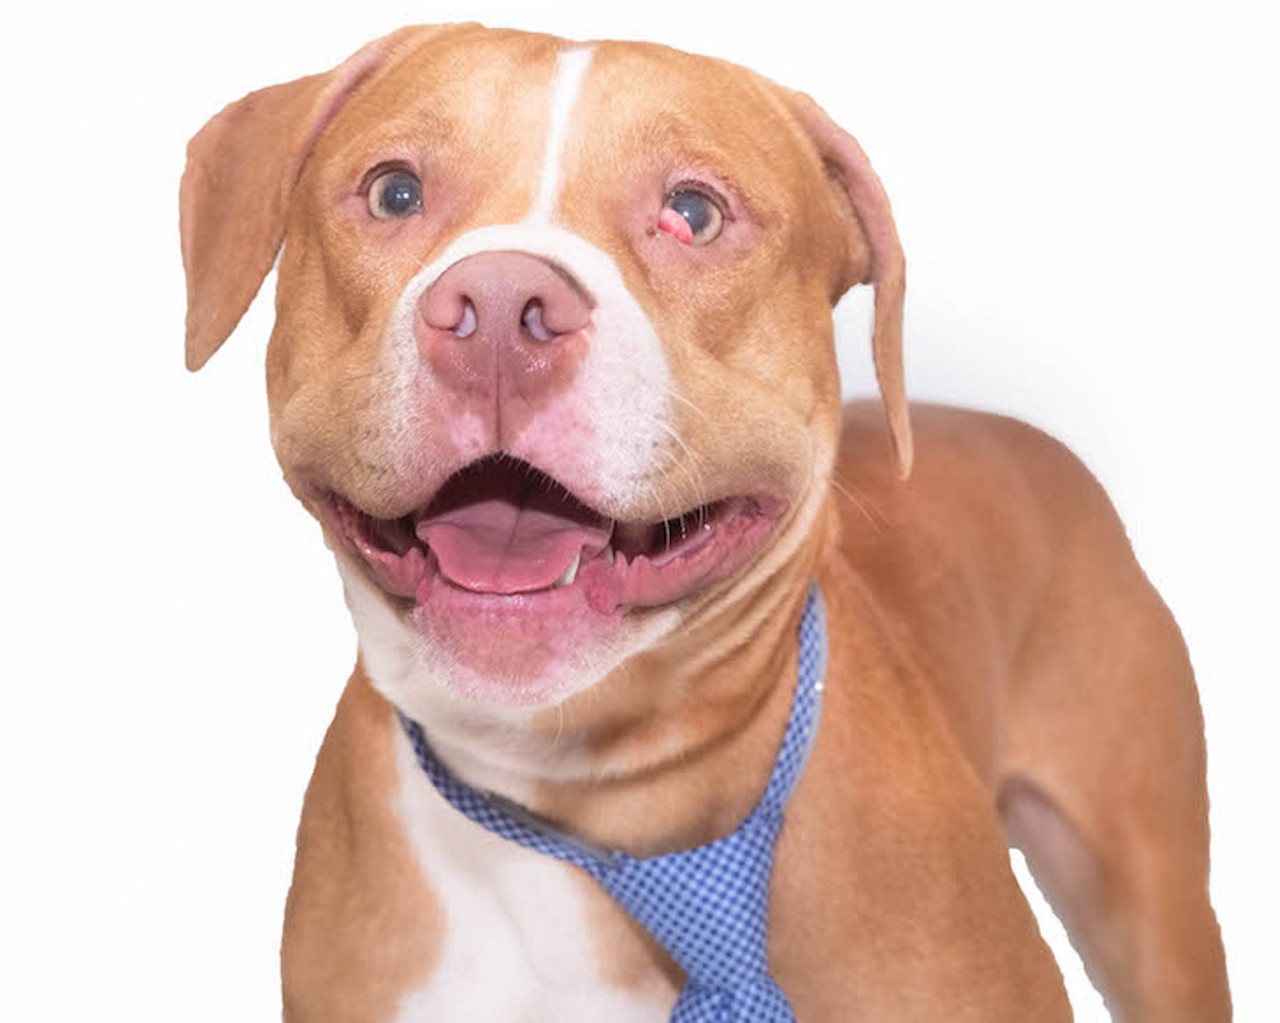 Adorable, adoptable dogs in Orange County, in exact order of cuteness